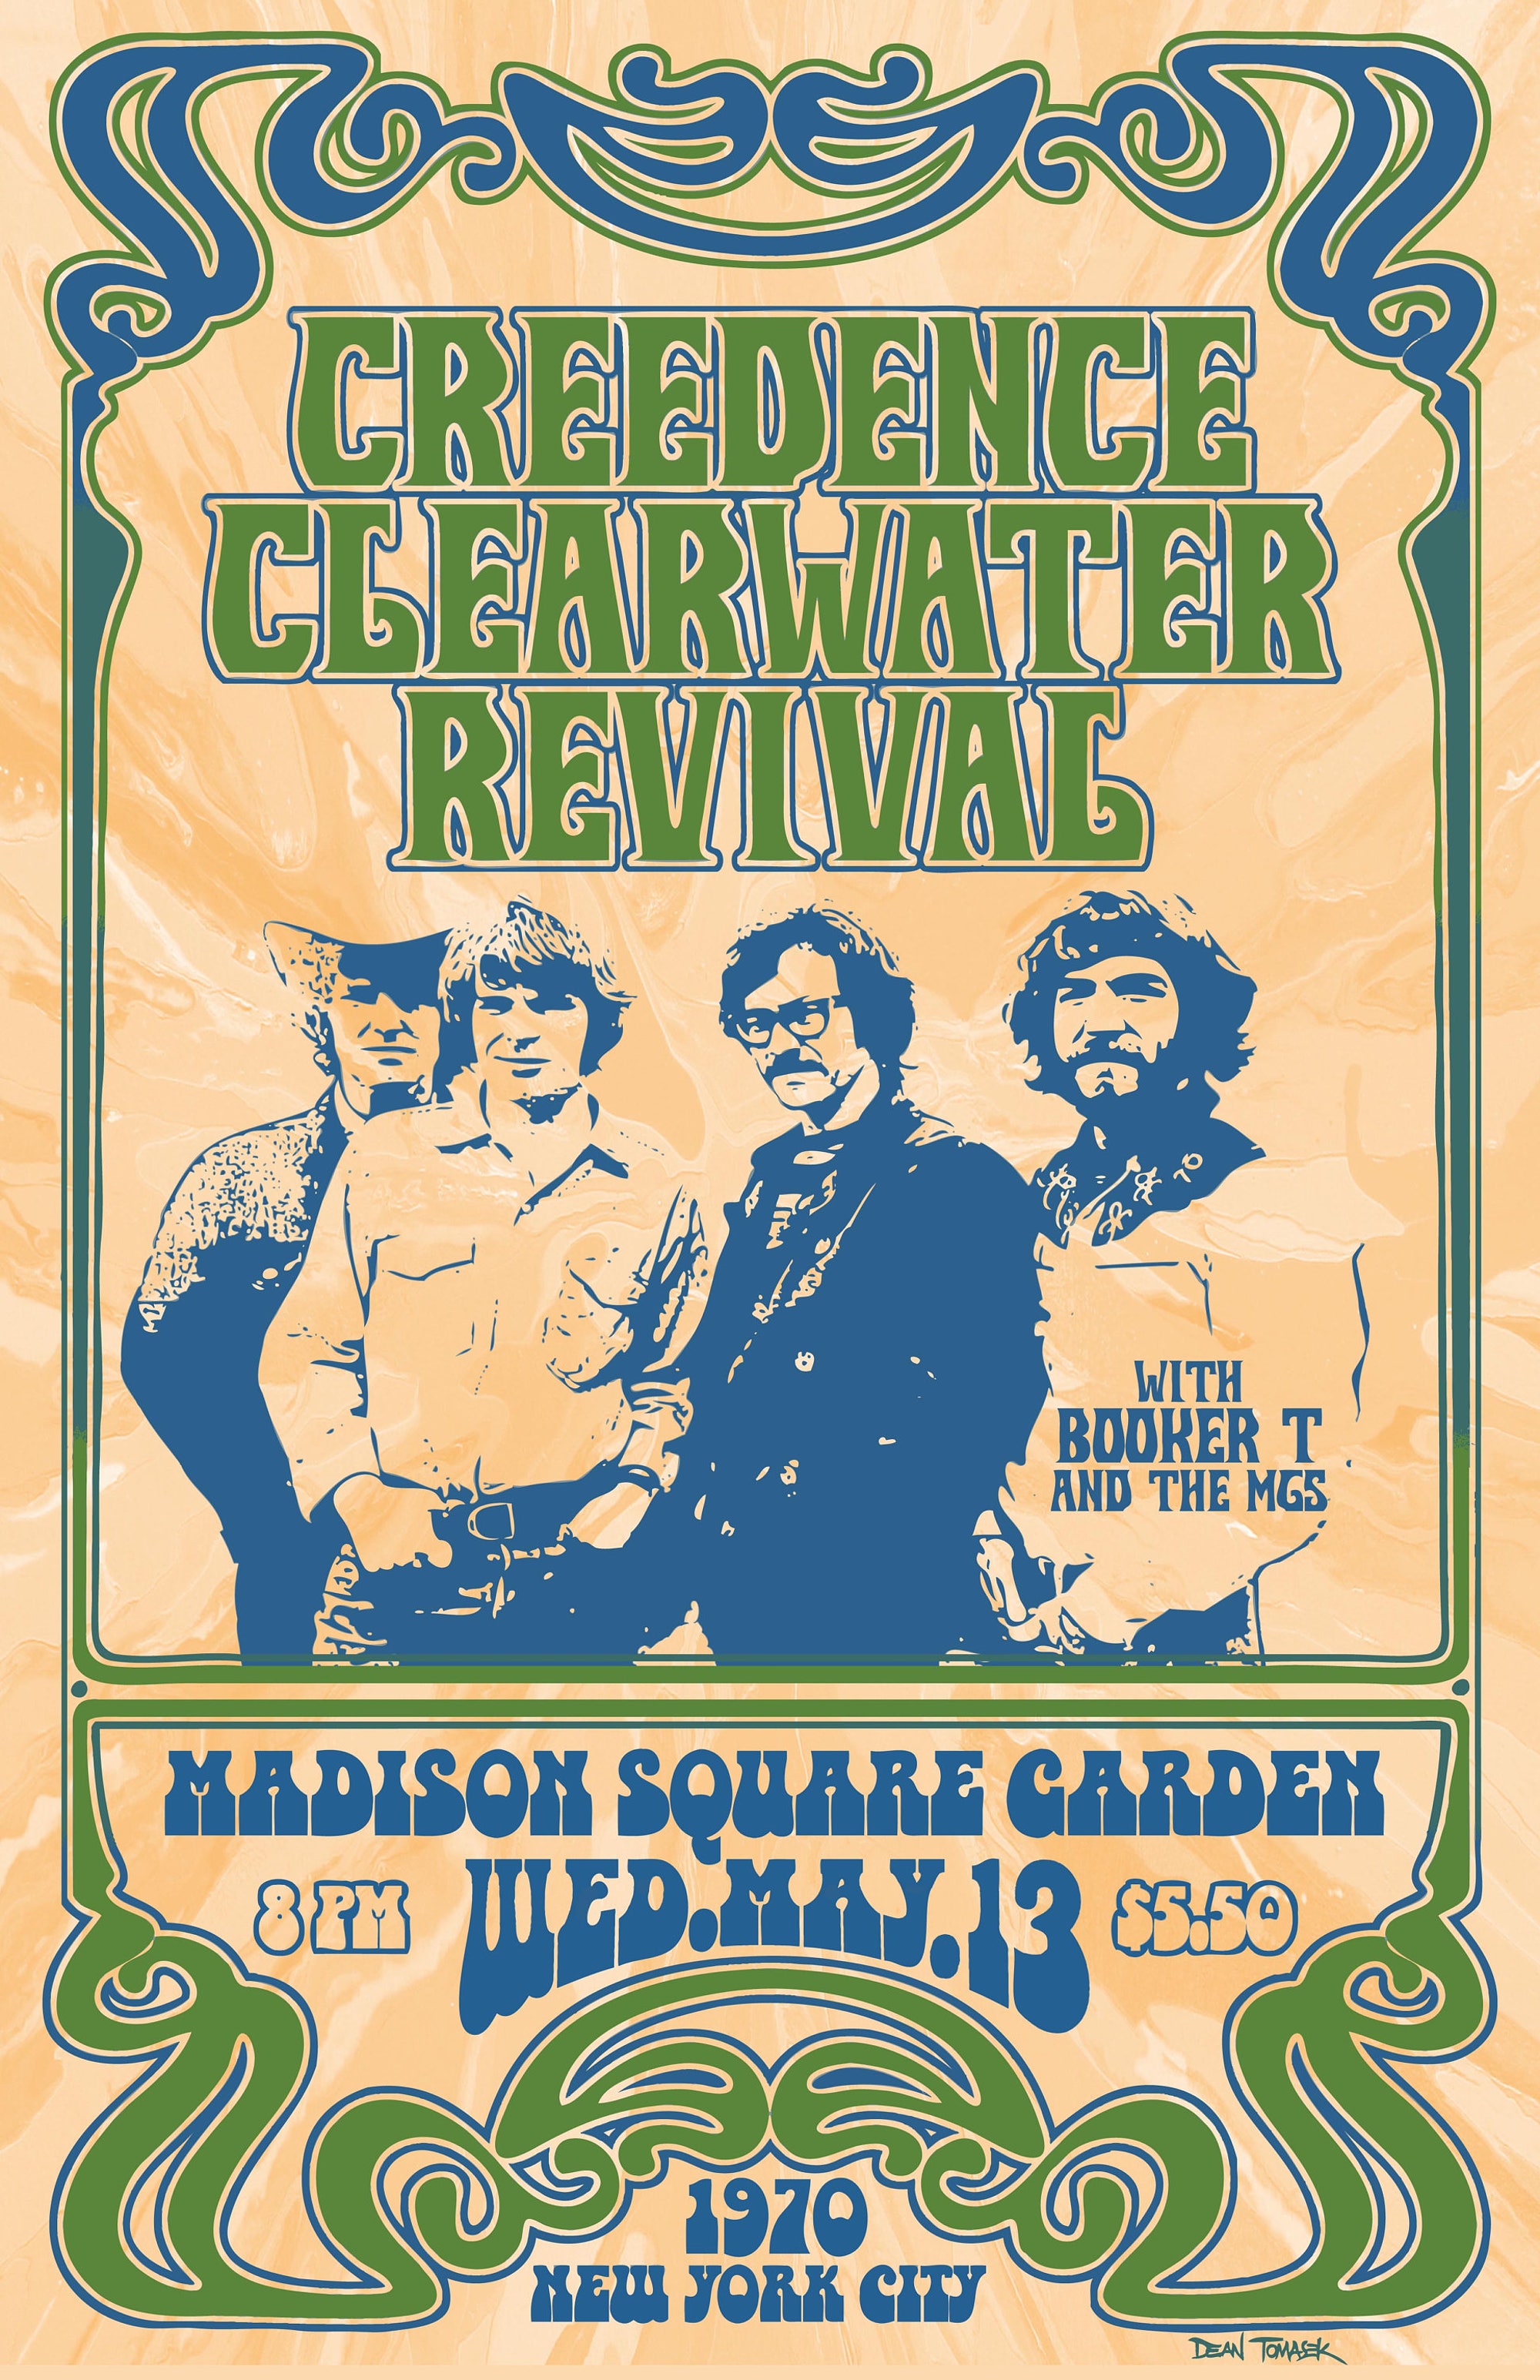 Creedence Clearwater Revival 1970 Tour Poster